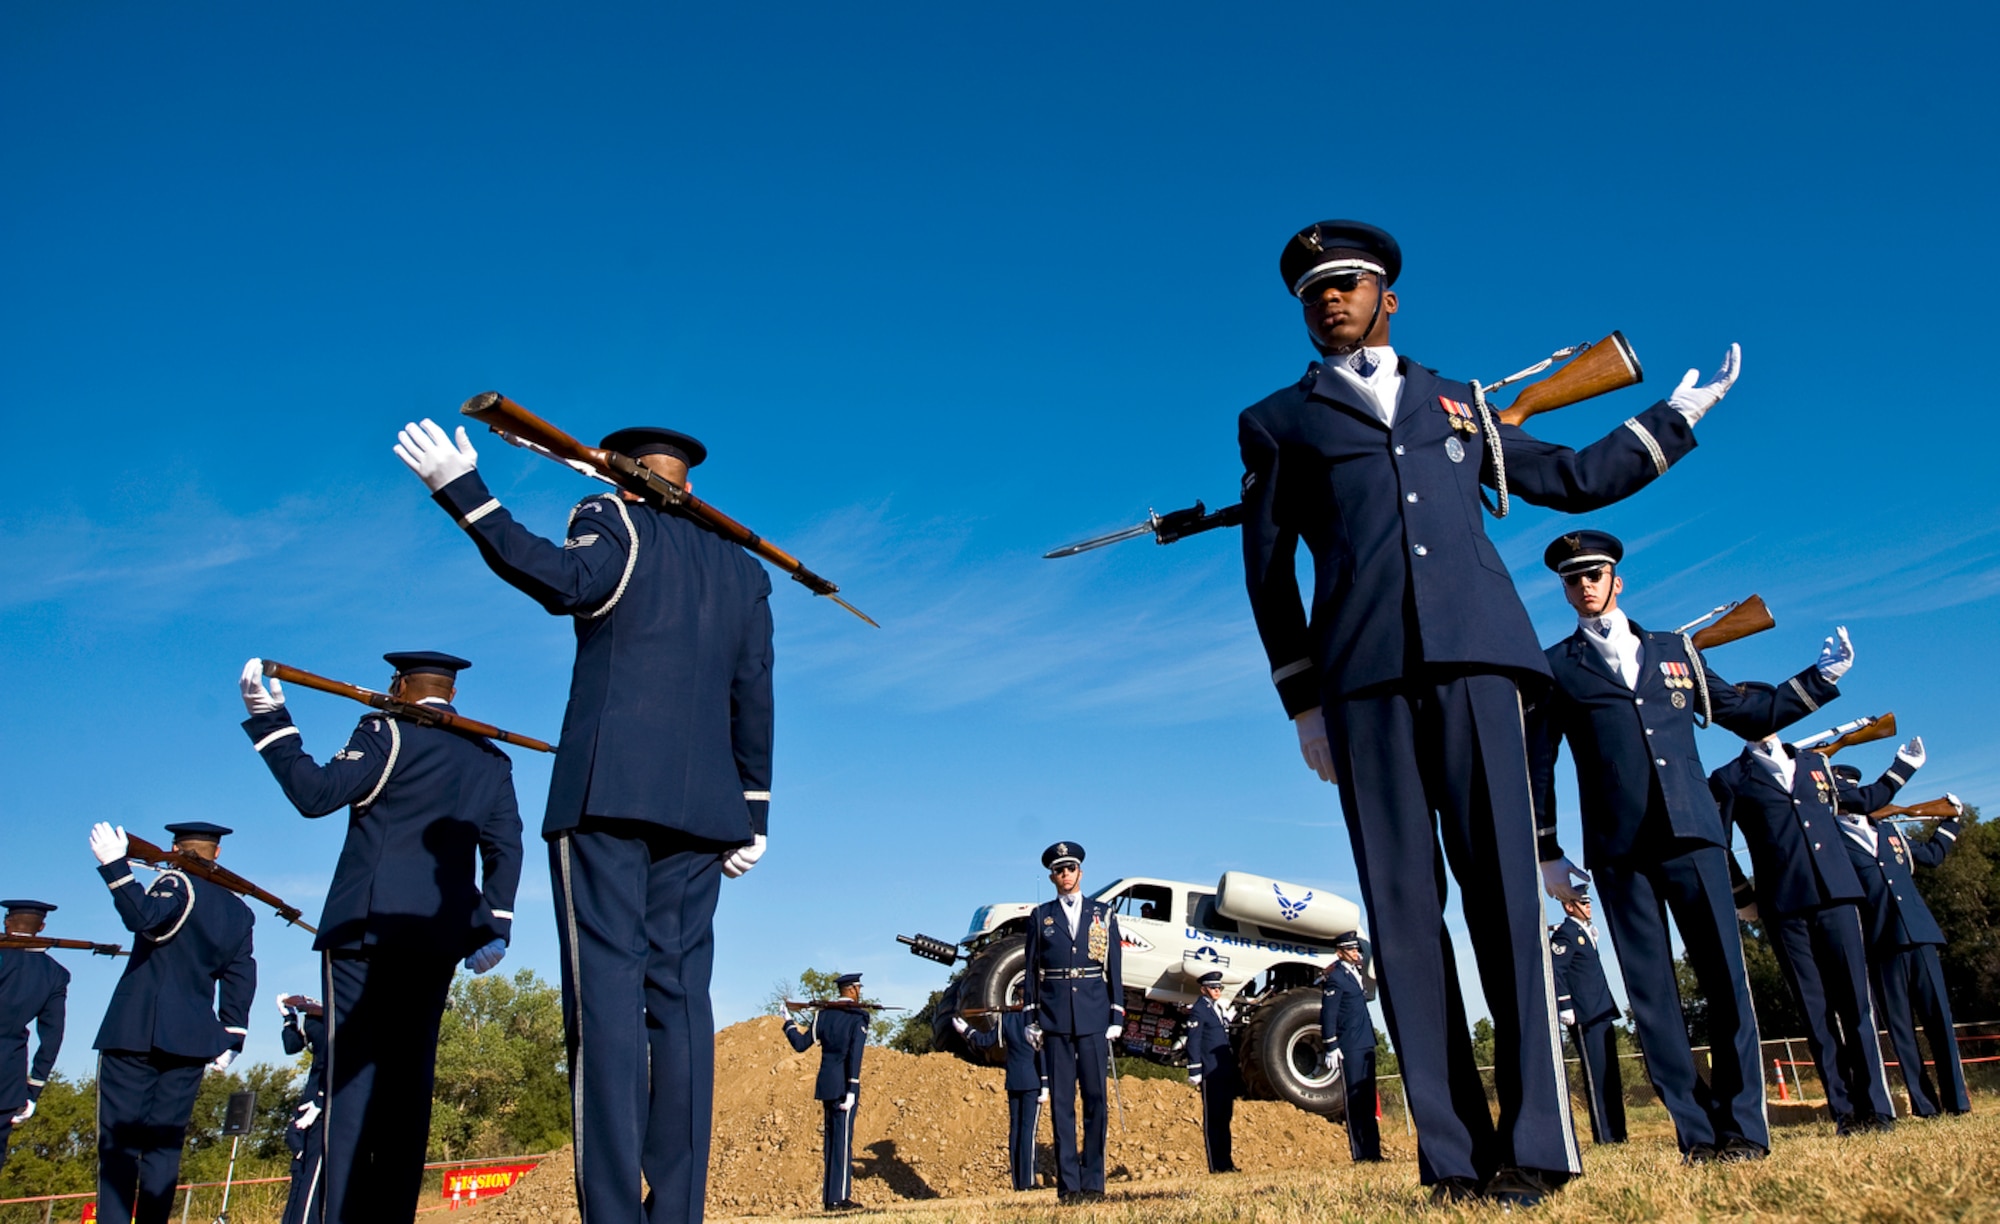 The United States Air Force Honor Guard Drill Team performs during the 10th Annual Mather Mud Run in Rancho Cordova, Calif., Sept. 5, 2009, for Air Force Week Sacramento. The Air Force Week is an event using various activities and exhibitions to educate the local community about the Air Force's capabilities and missions. (U.S. Air Force photo/Staff Sgt. Bennie J. Davis III) 